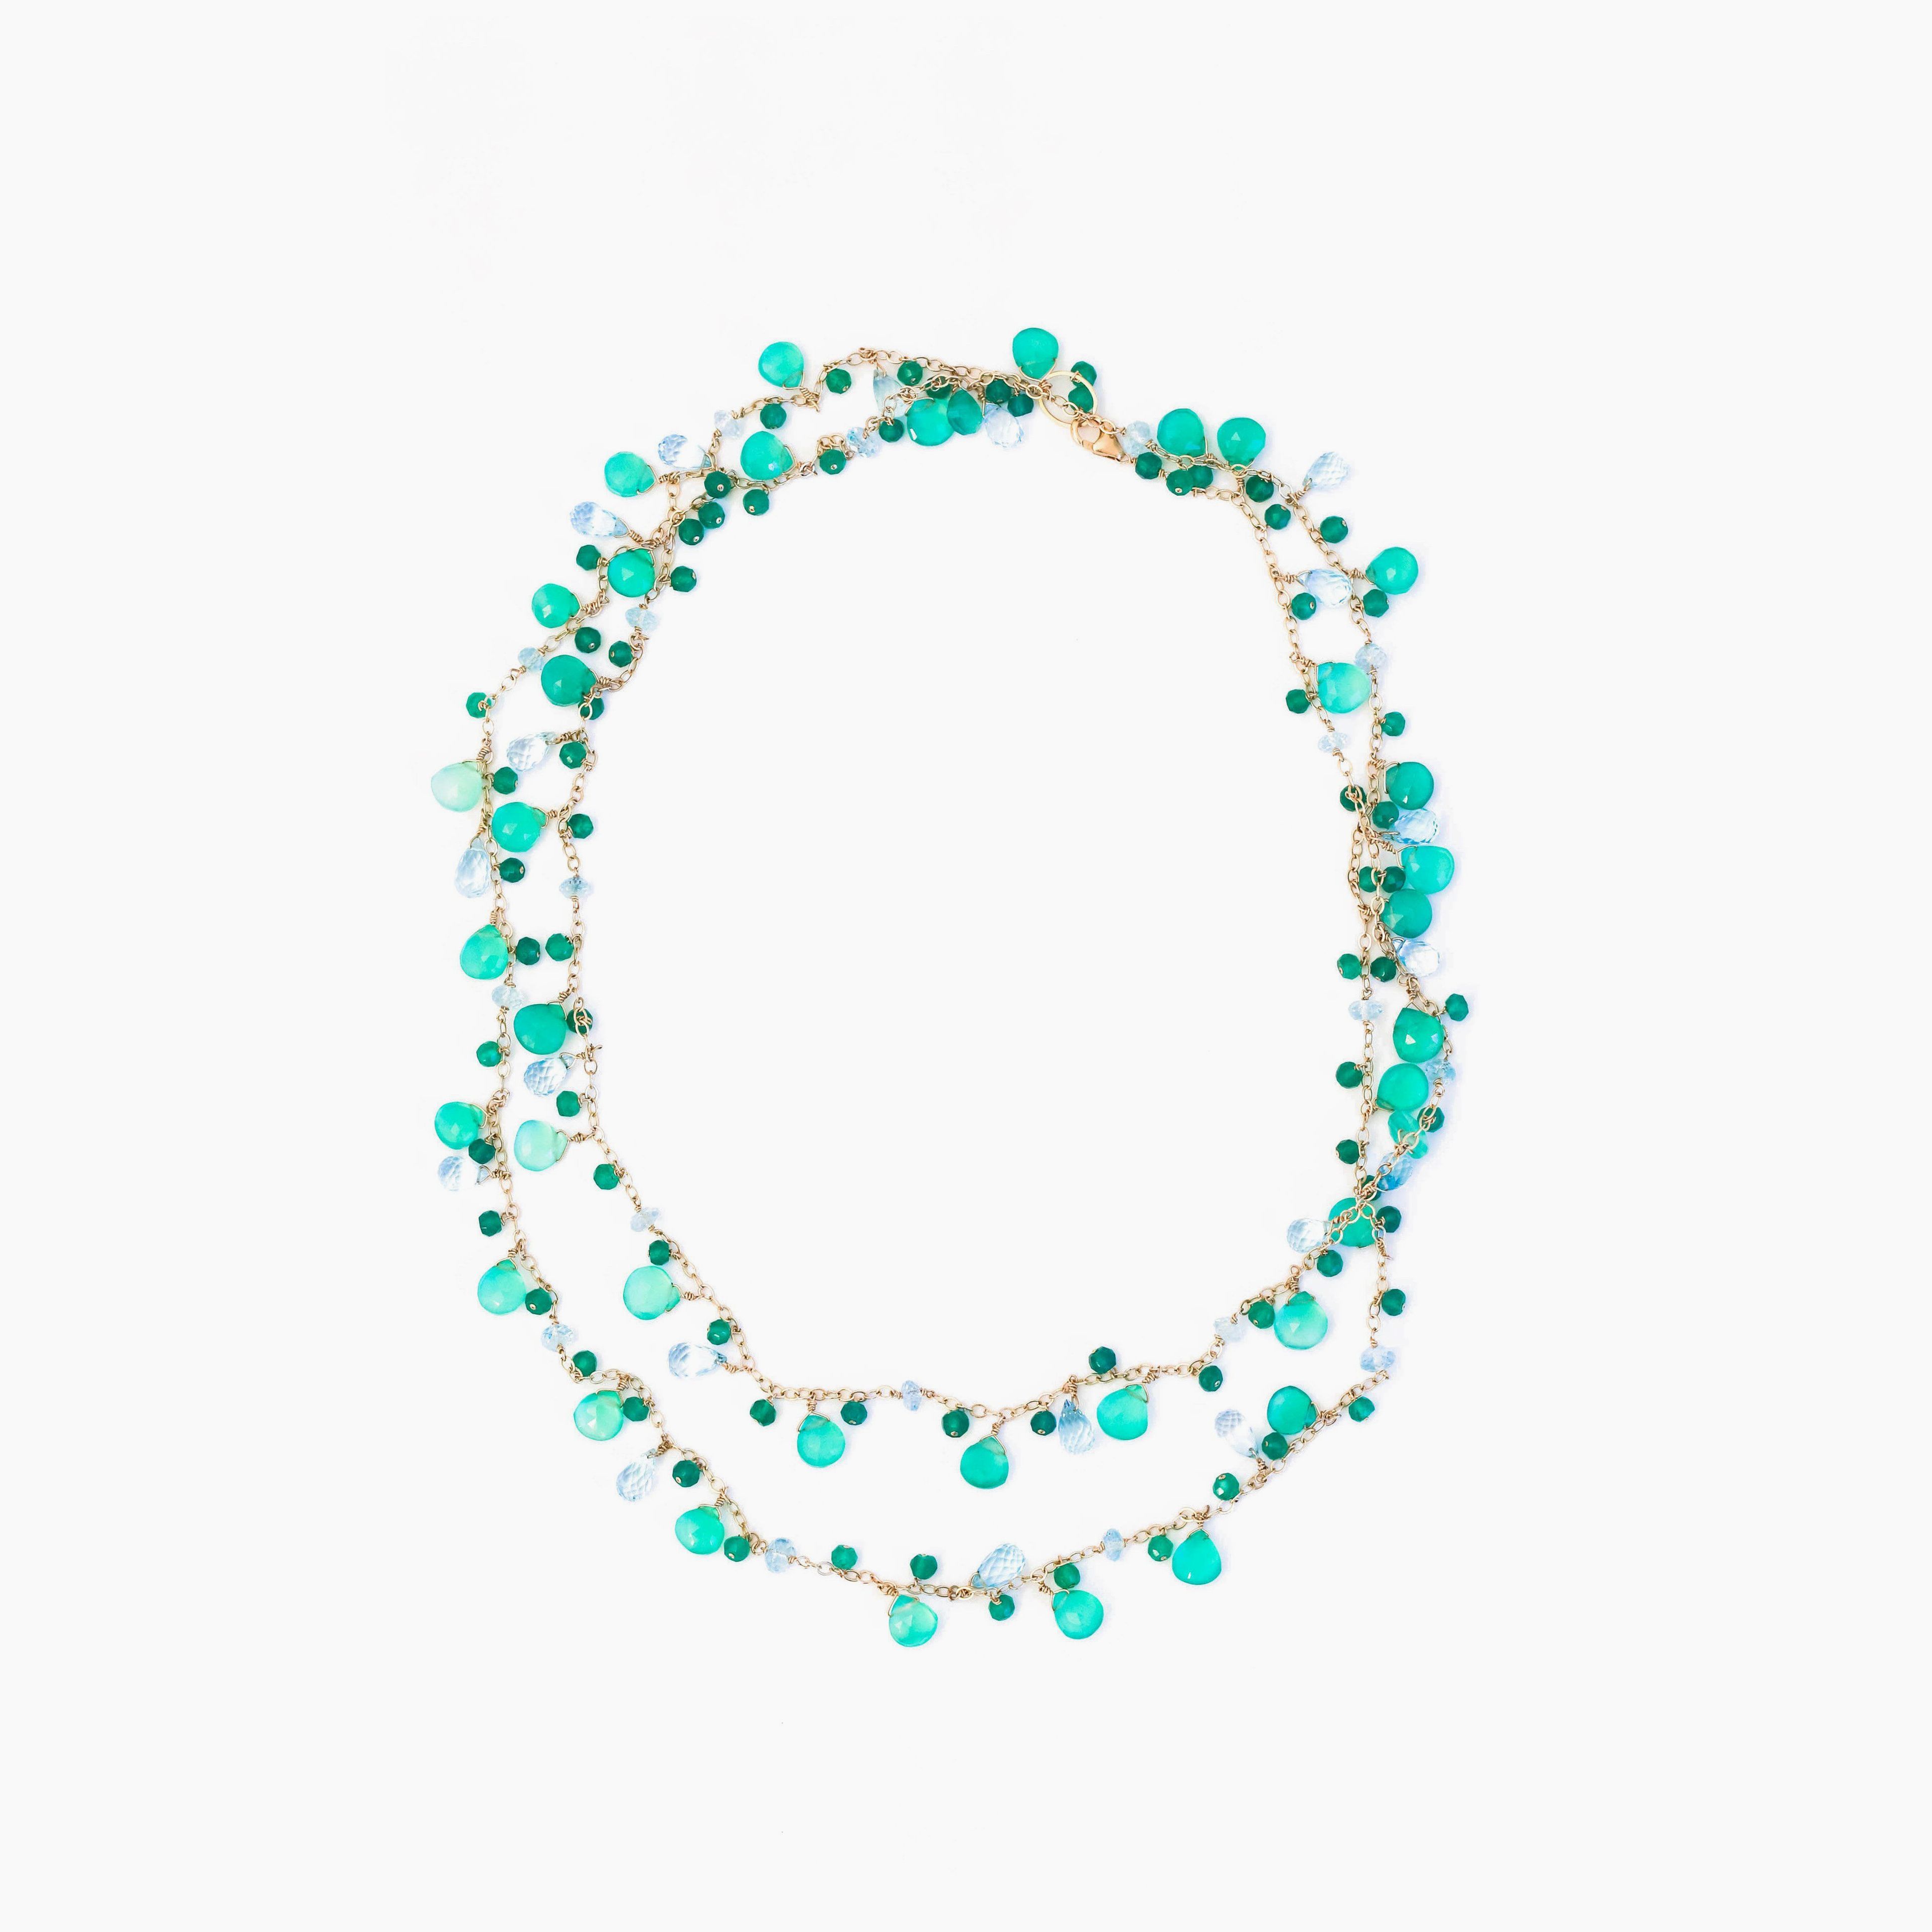 Green Onyx and Blue Topaz Long Chained Necklace